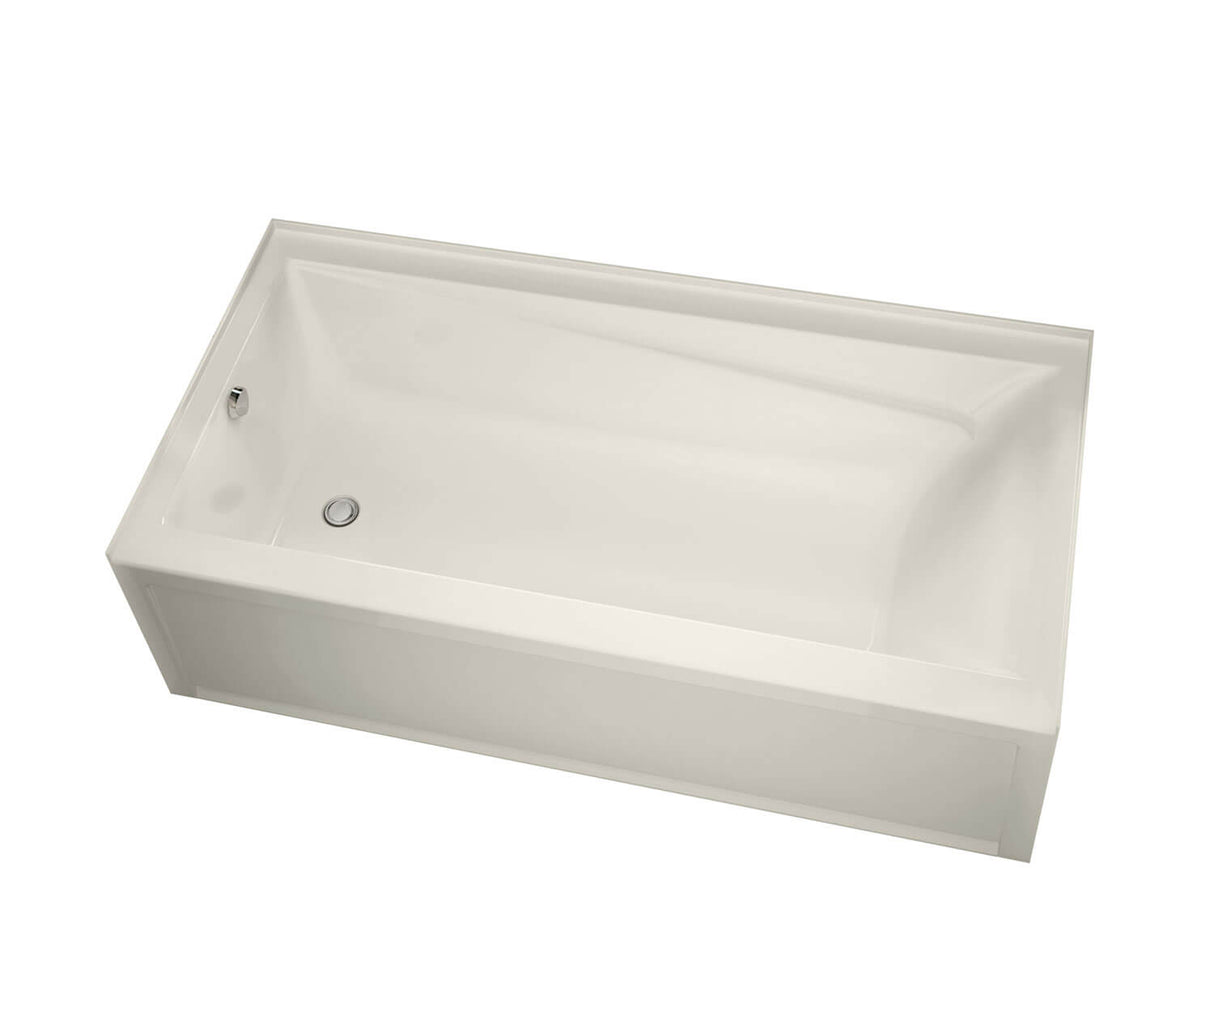 MAAX 106176-L-000-007 Exhibit 6042 IFS AFR Acrylic Alcove Left-Hand Drain Bathtub in Biscuit